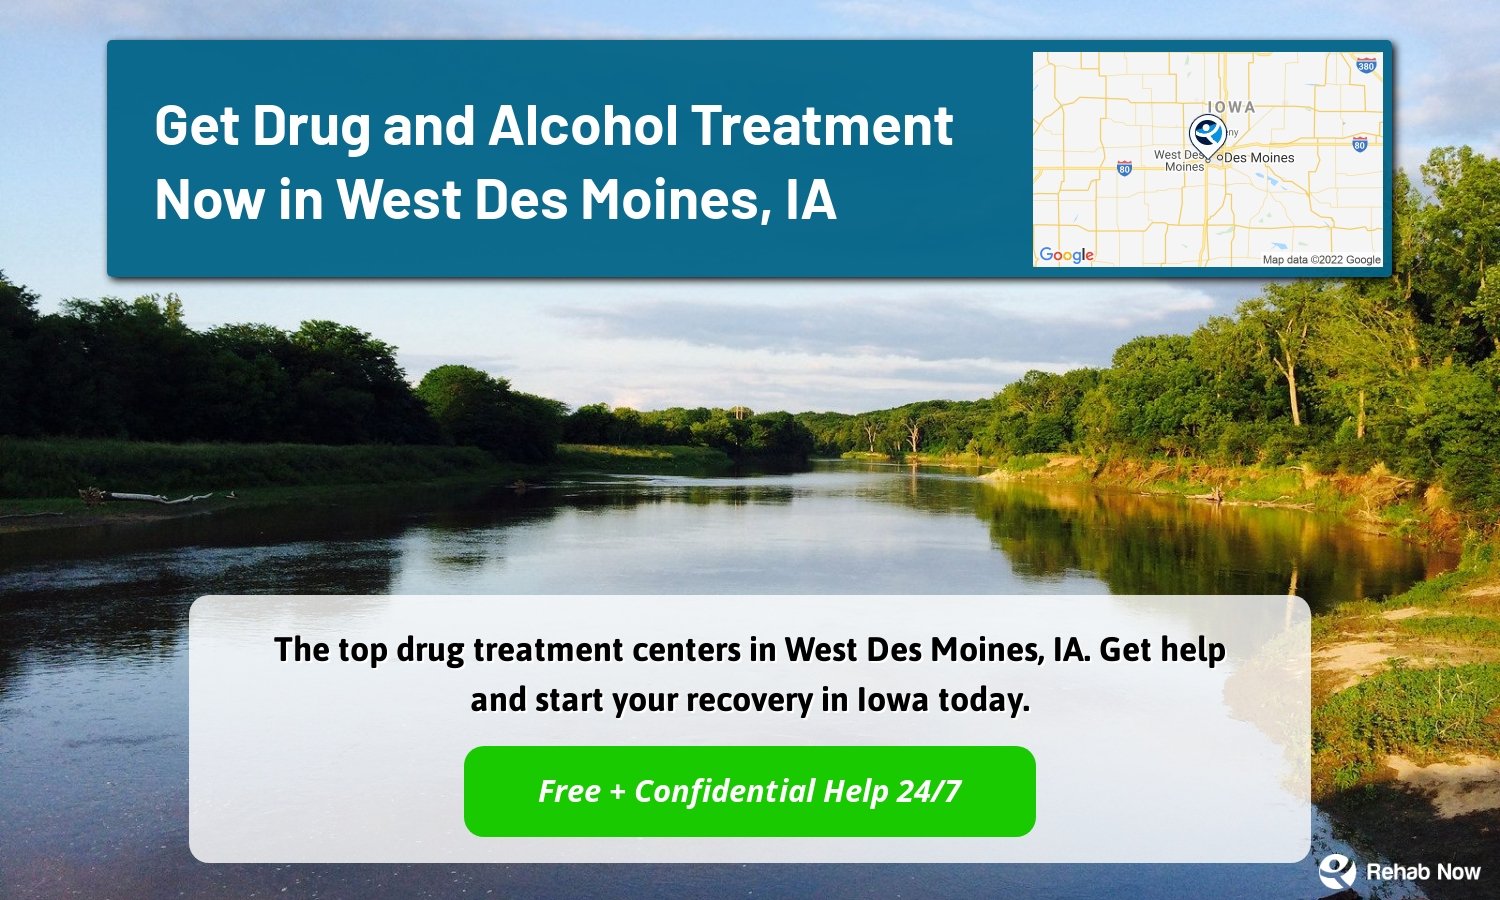 The top drug treatment centers in West Des Moines, IA. Get help and start your recovery in Iowa today.